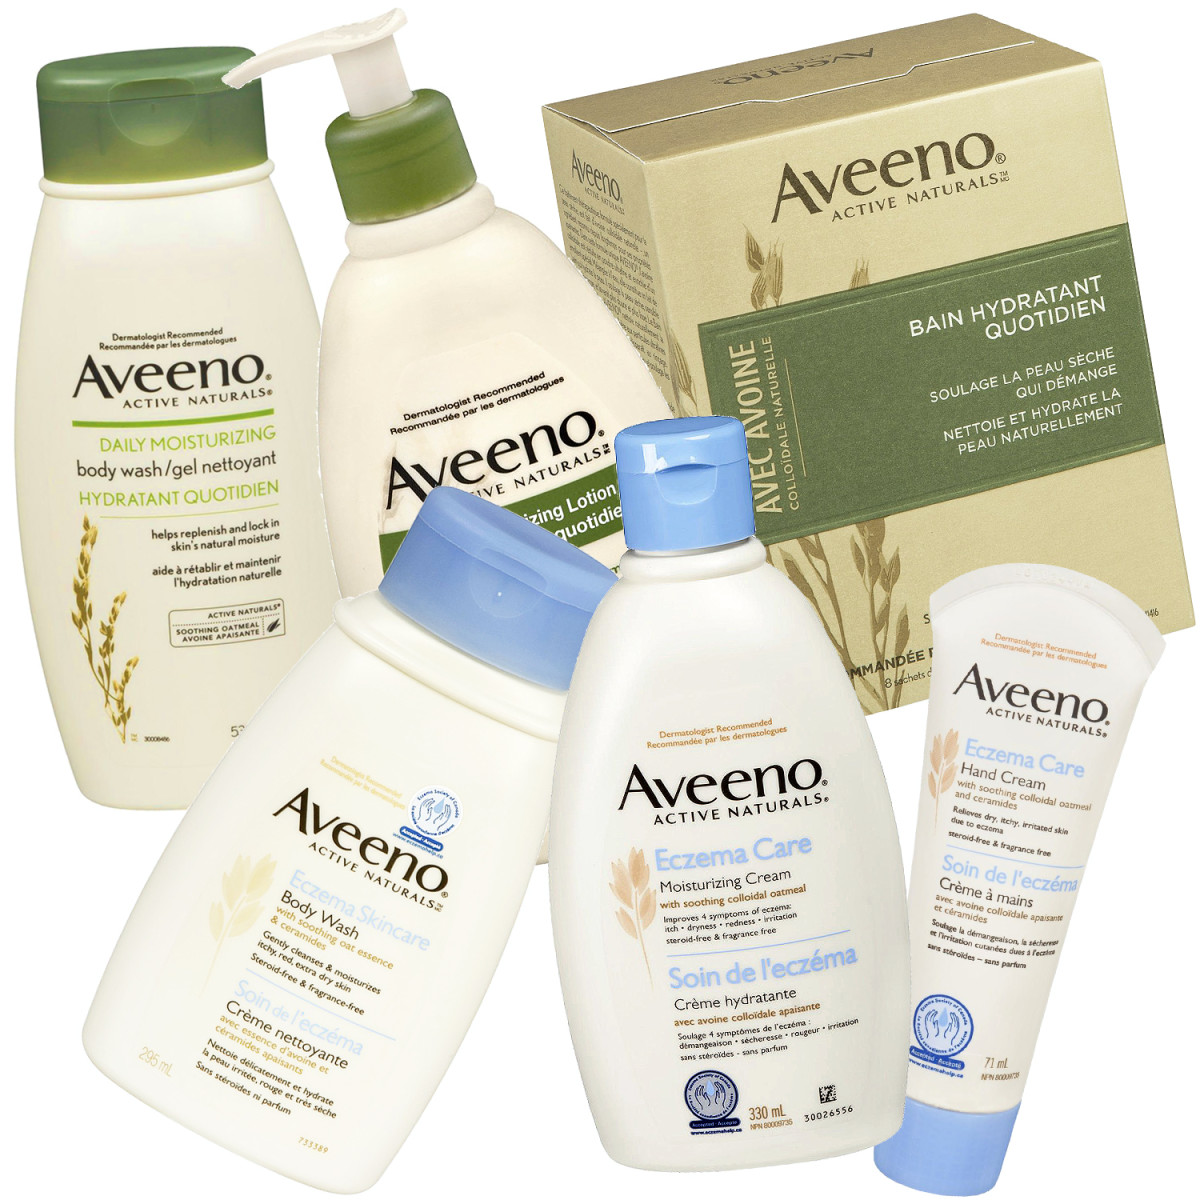 Aveeno Daily and Eczema Care giveaway!